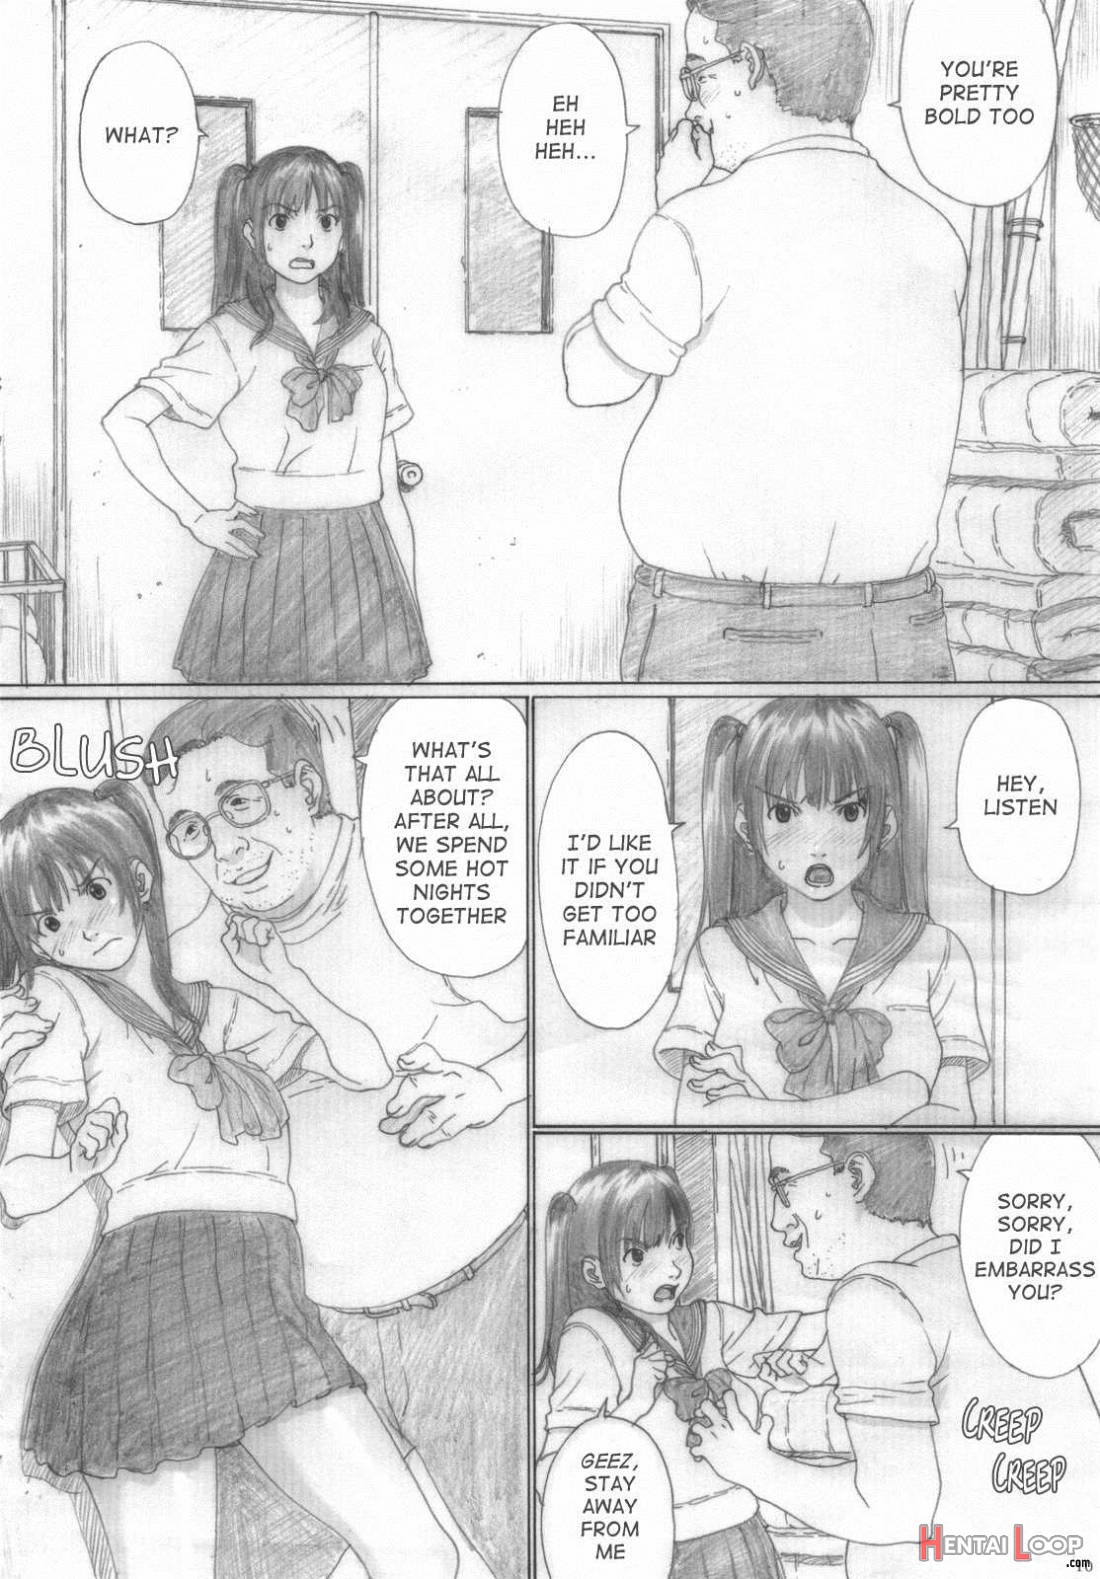 Peach Girl 2 page 10